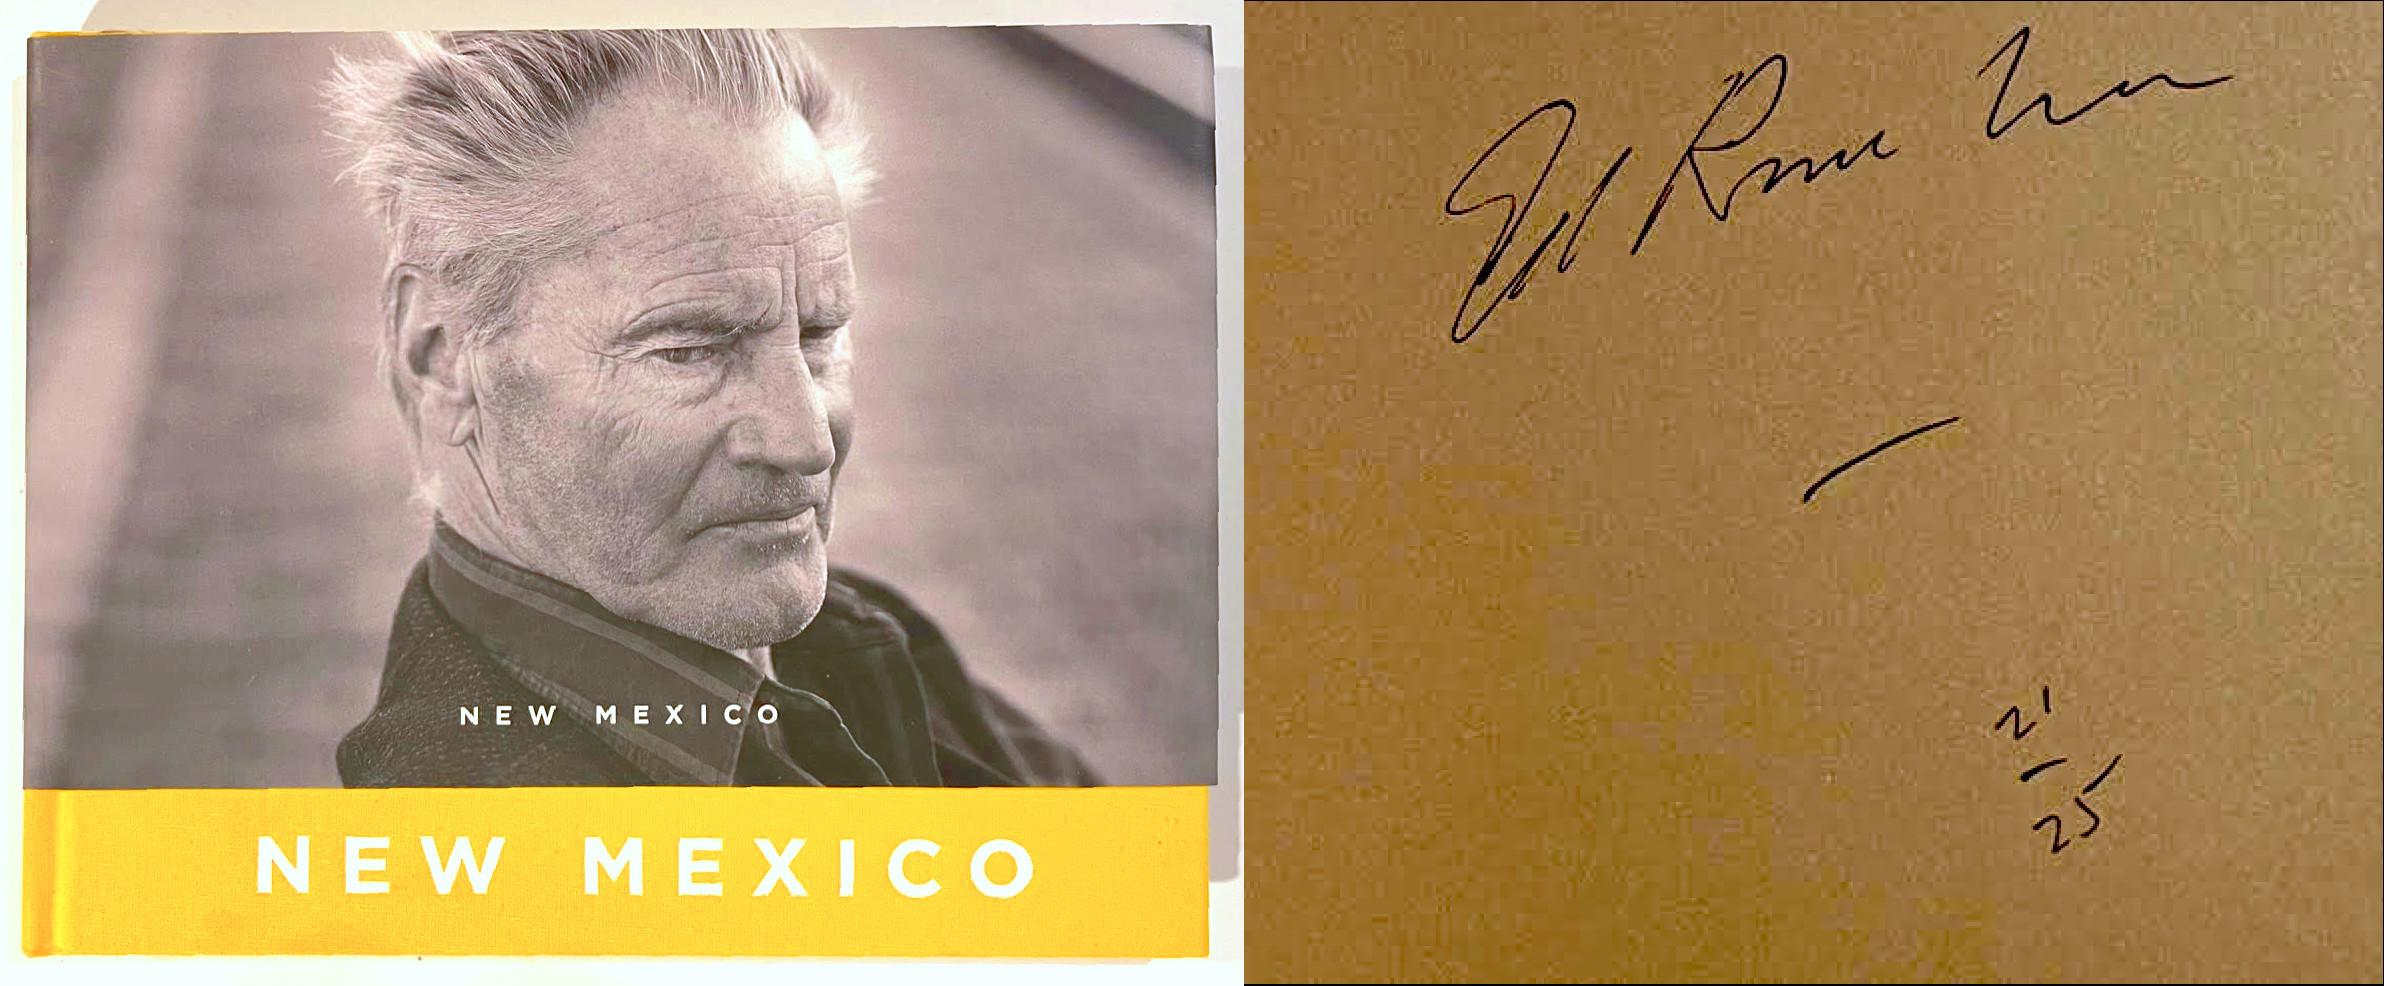 Ed Ruscha
New Mexico (Limited Edition monograph, hand signed and numbered by Ed Ruscha), 2020
Hardback monograph (Signed and numbered by Ed Ruscha)
Boldly signed and numbered 21/25 by Ed Ruscha.
8 1/4 × 10 1/2 × 1 inches
Limited Edition of 25